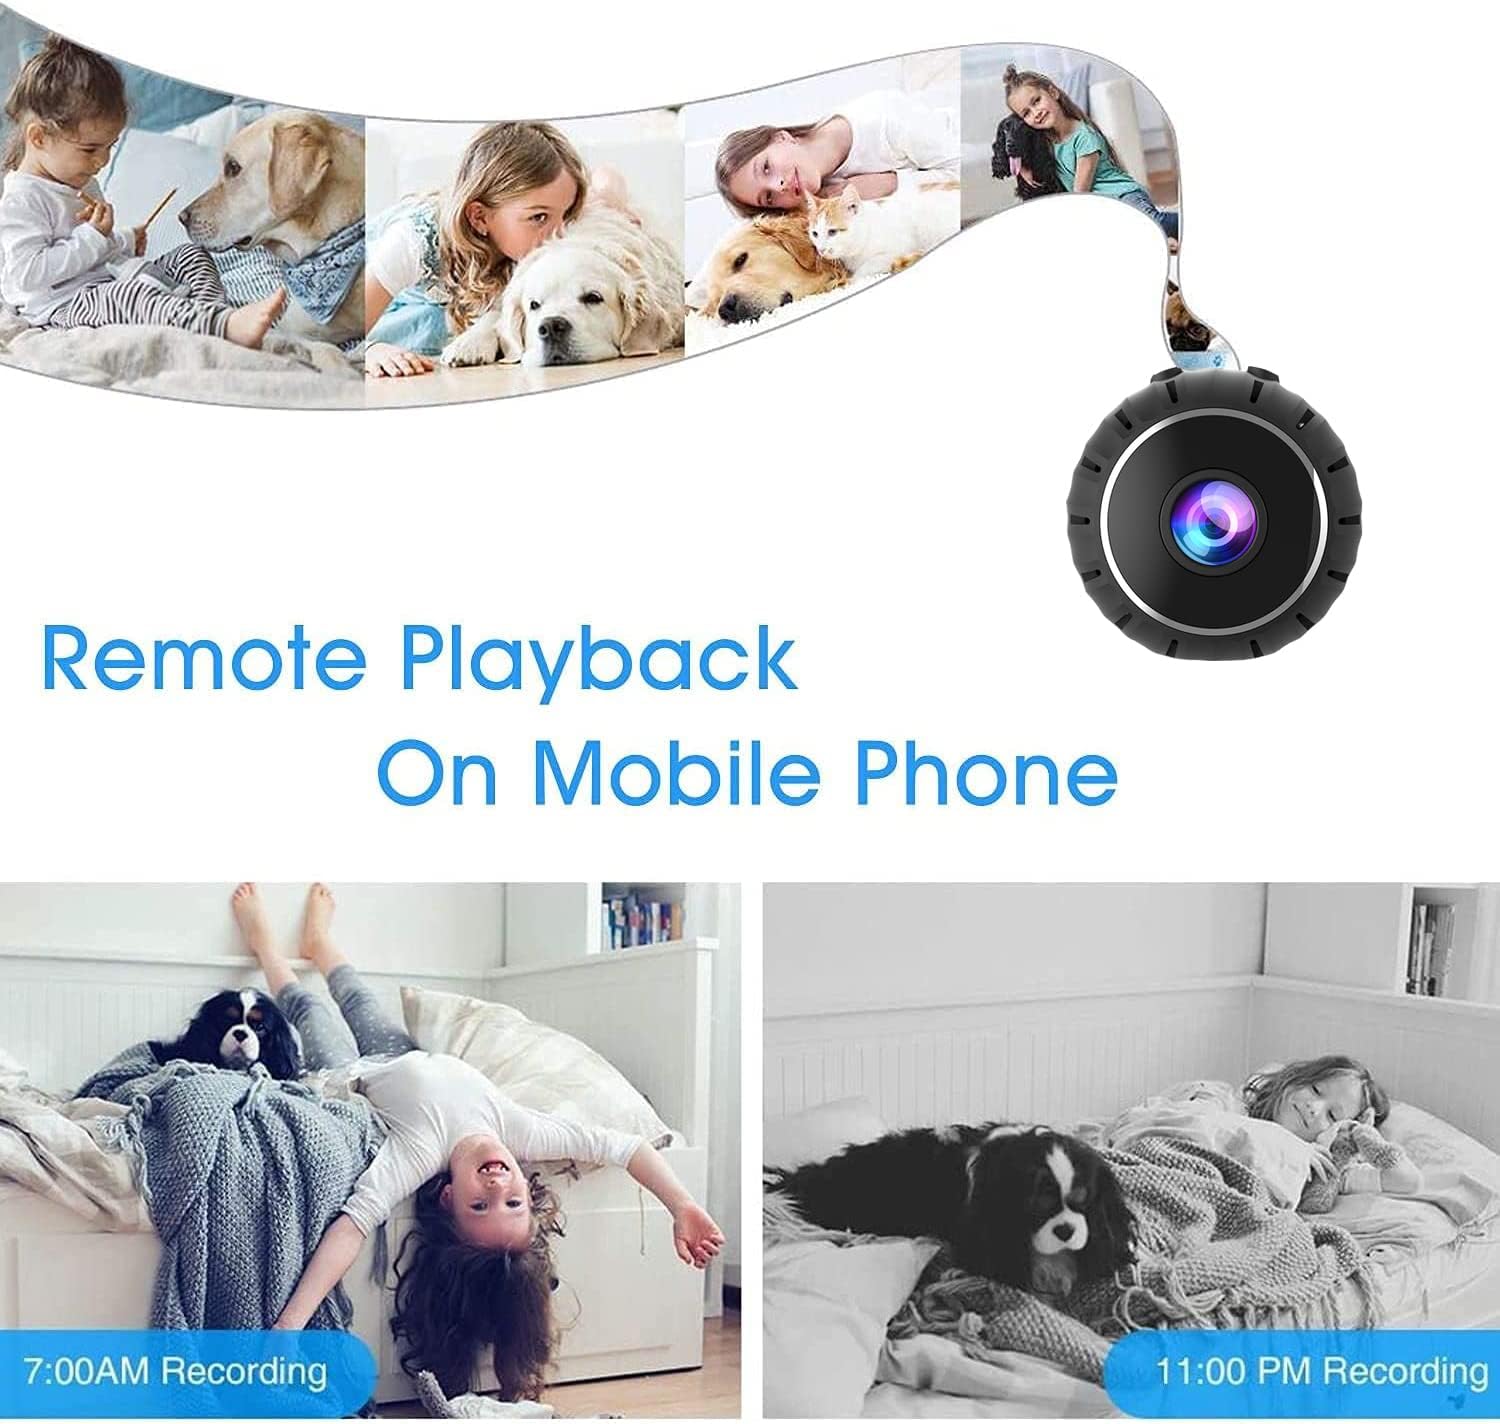 Security-Cameras-Mini-Camera-for-Home-Security-1080p-HD-Mini-IR-Camera-WiFi-Wireless-Small-Indoor-Nanny-Camera-Cell-Phone-APP-Control-with-A-Wide-Angle-Remote-View-12